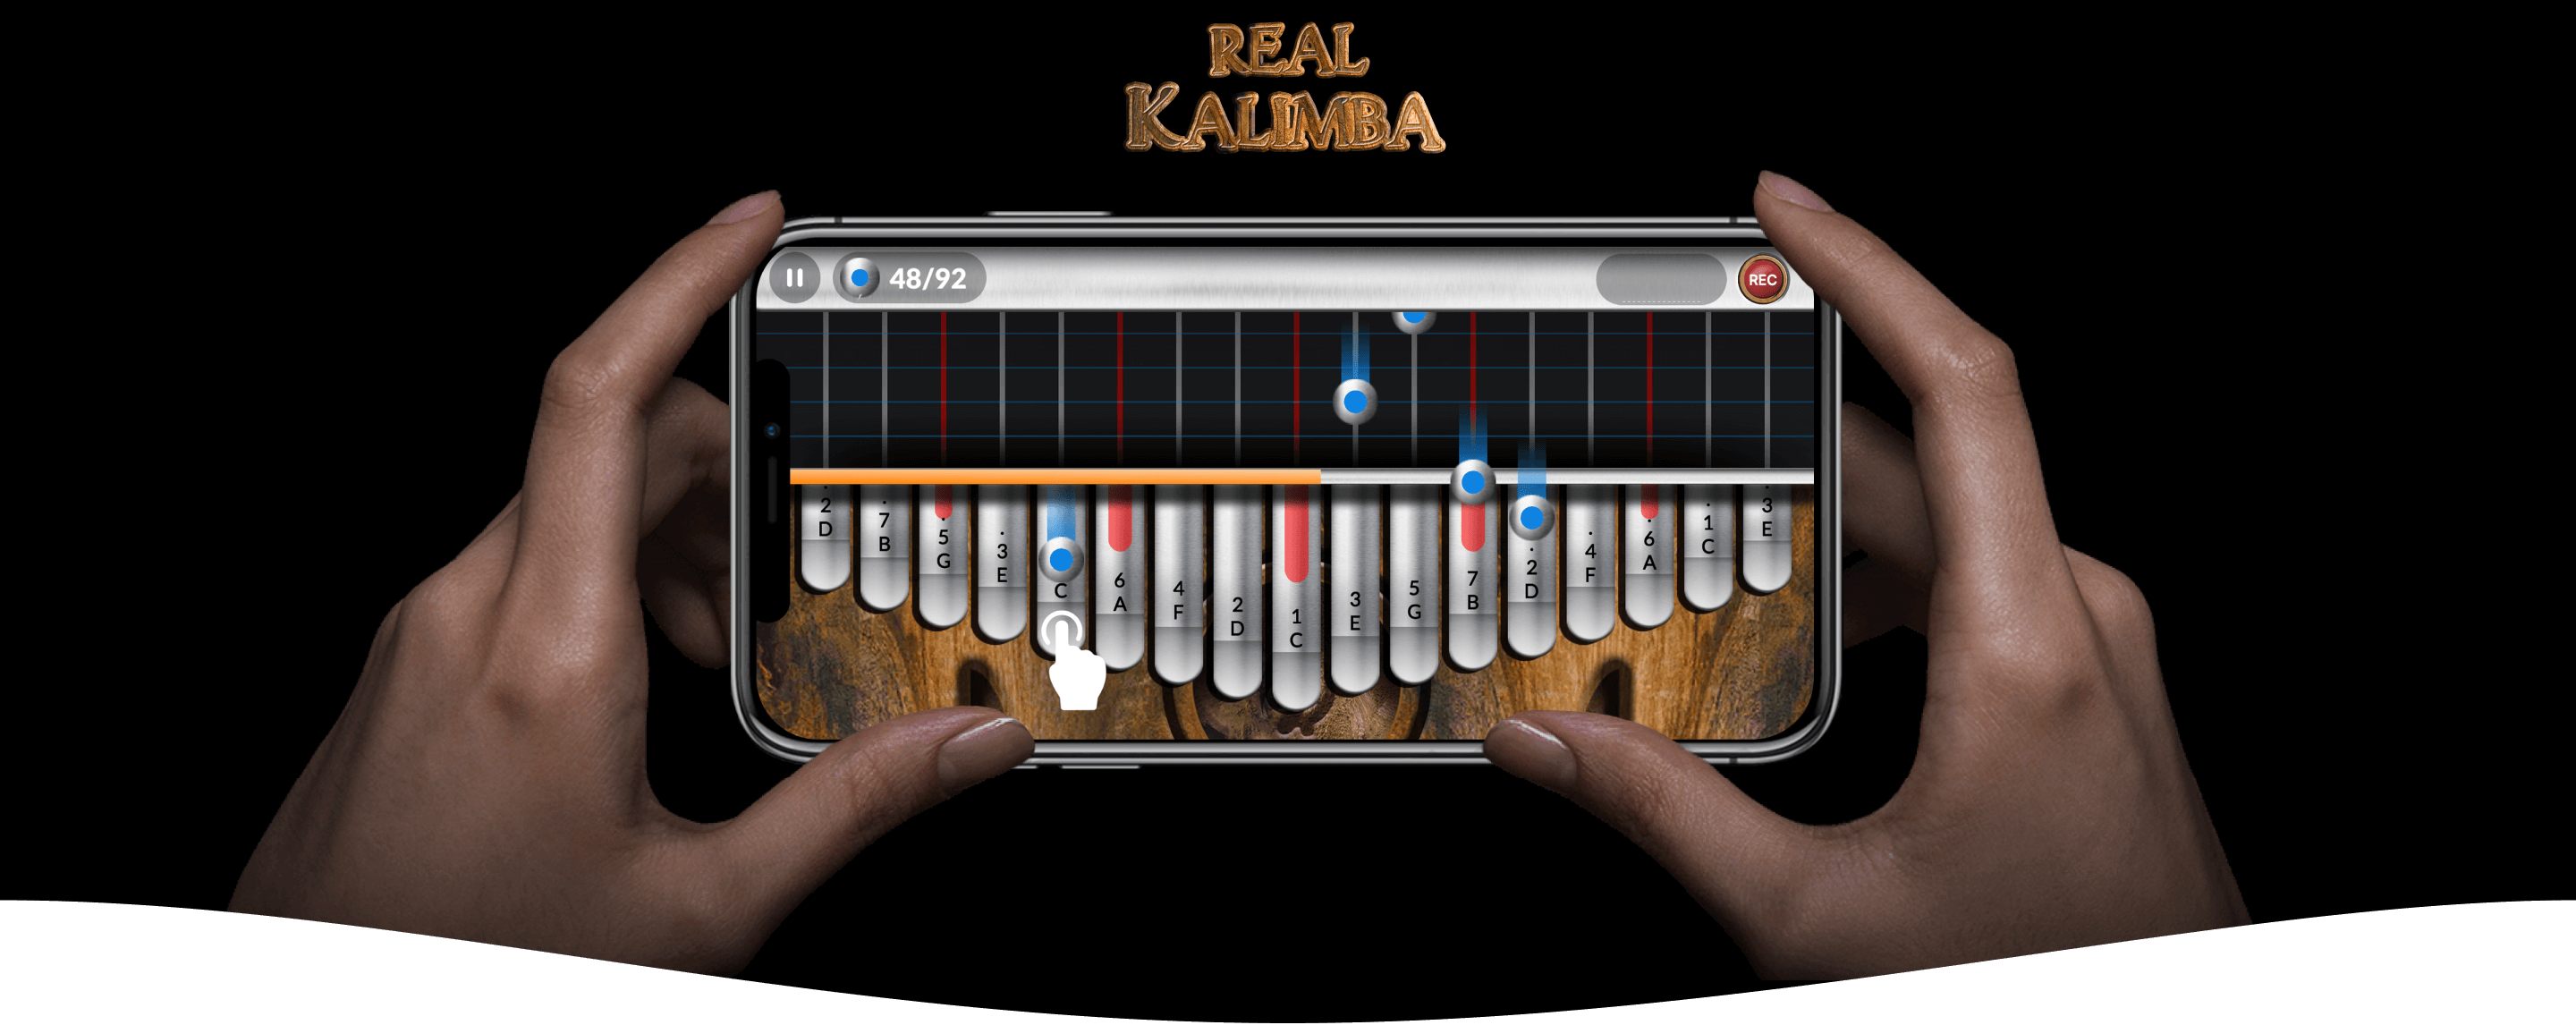 Two hands holding an iPhone on a dark background and the display showing Real Kalimbas blue metal falling notes